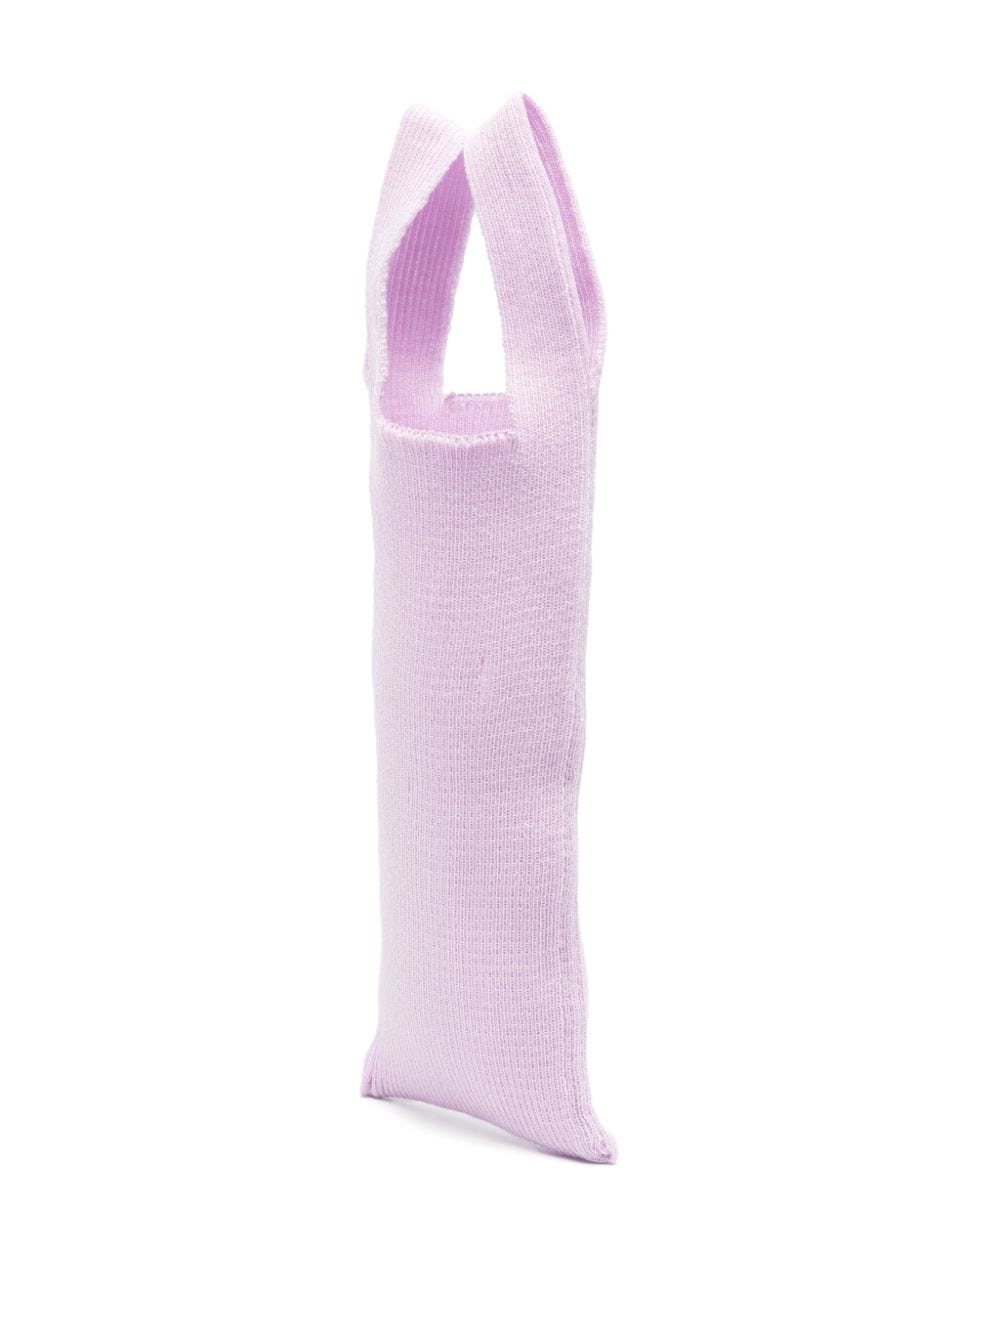 Shop A. Roege Hove Emma Knitted Tote Bag In Purple